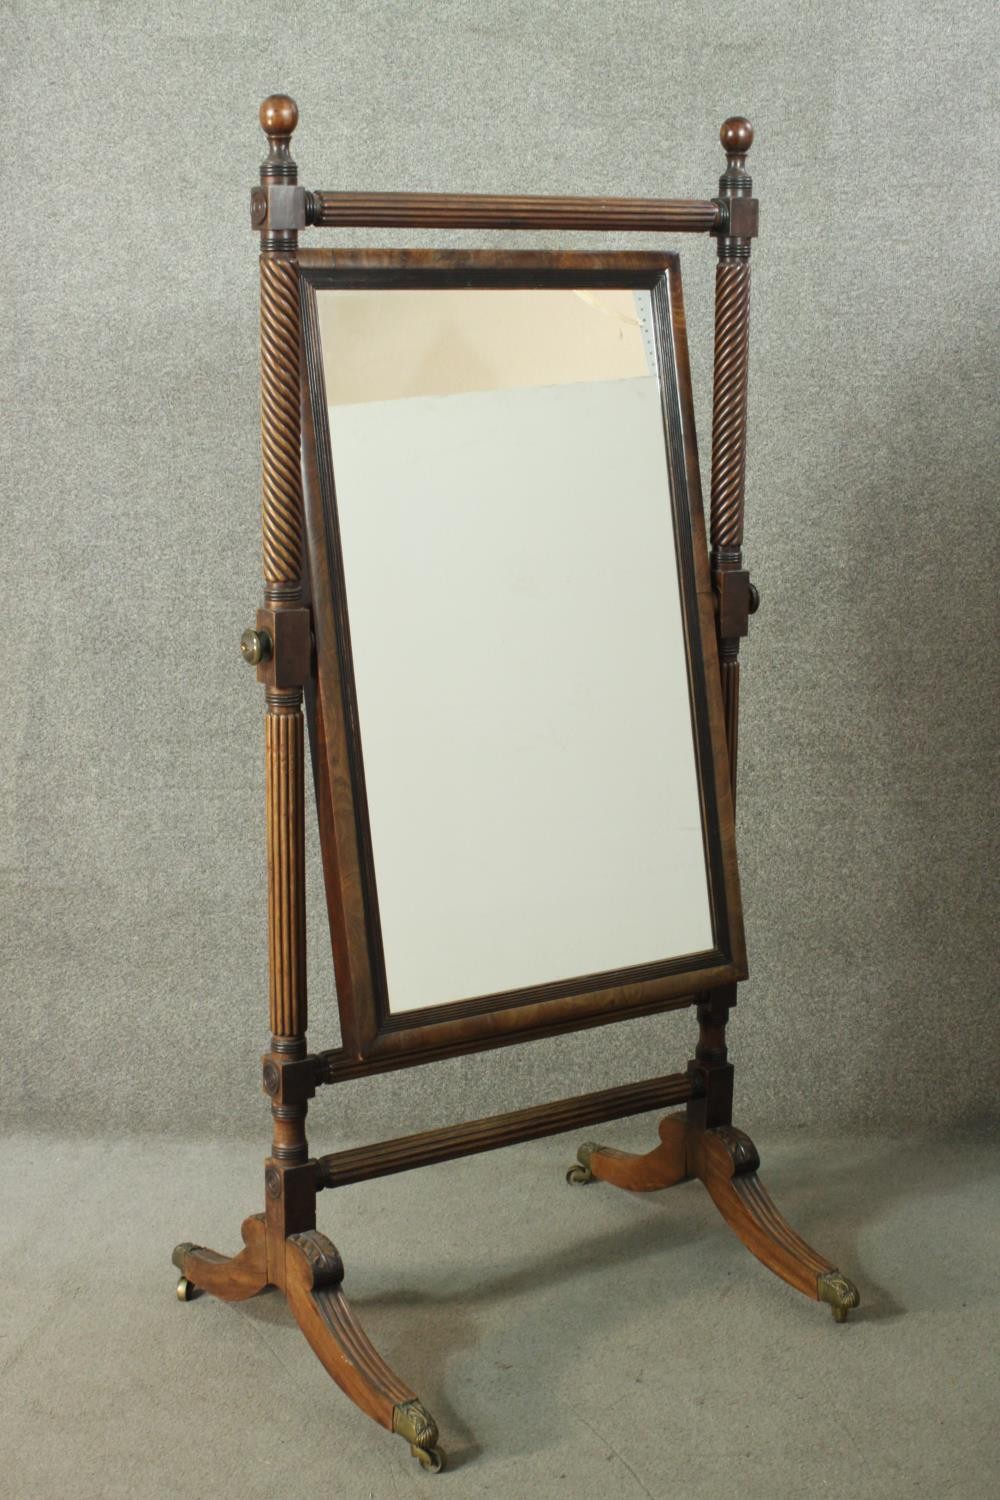 A George III mahogany cheval mirror, with a wrythen and reeded frame, set with a modern mirror - Image 13 of 13